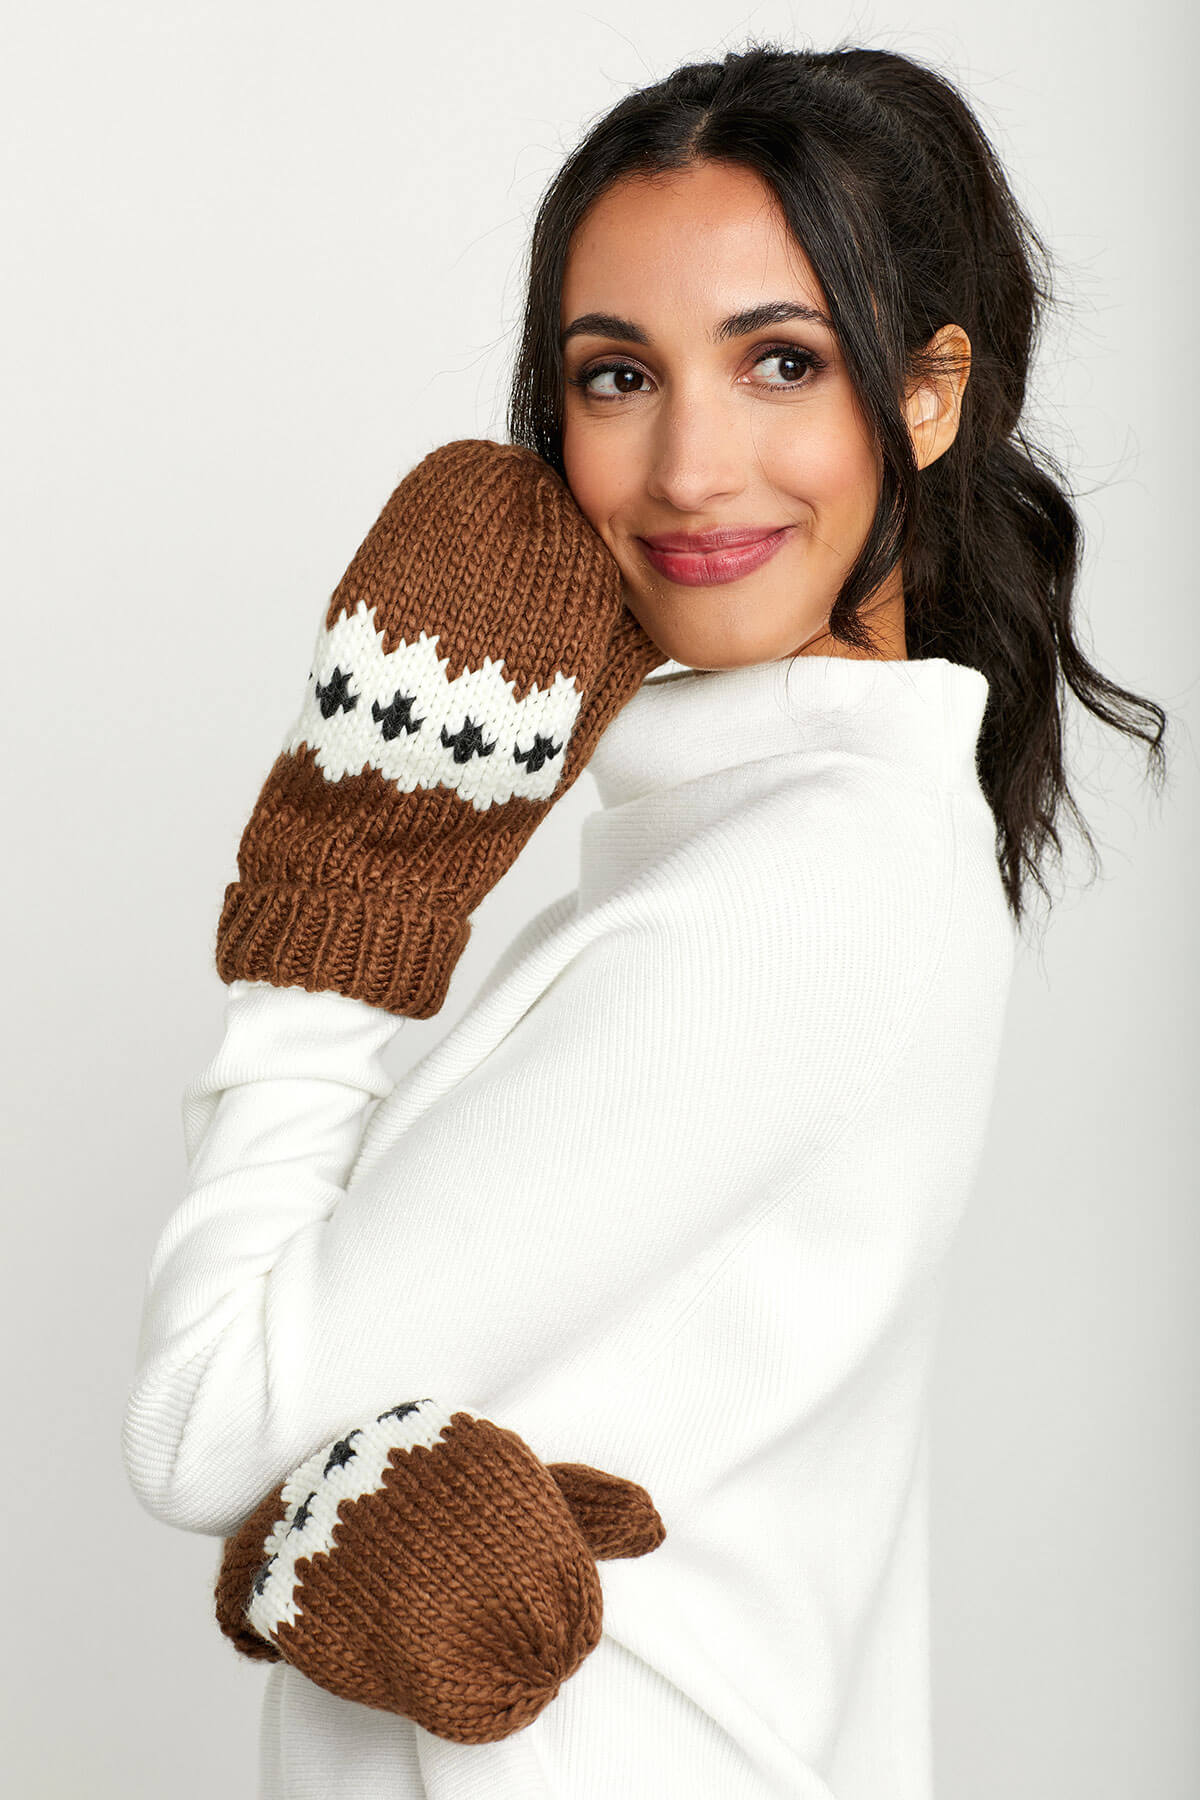 Panache Cocoa Patterned Mittens